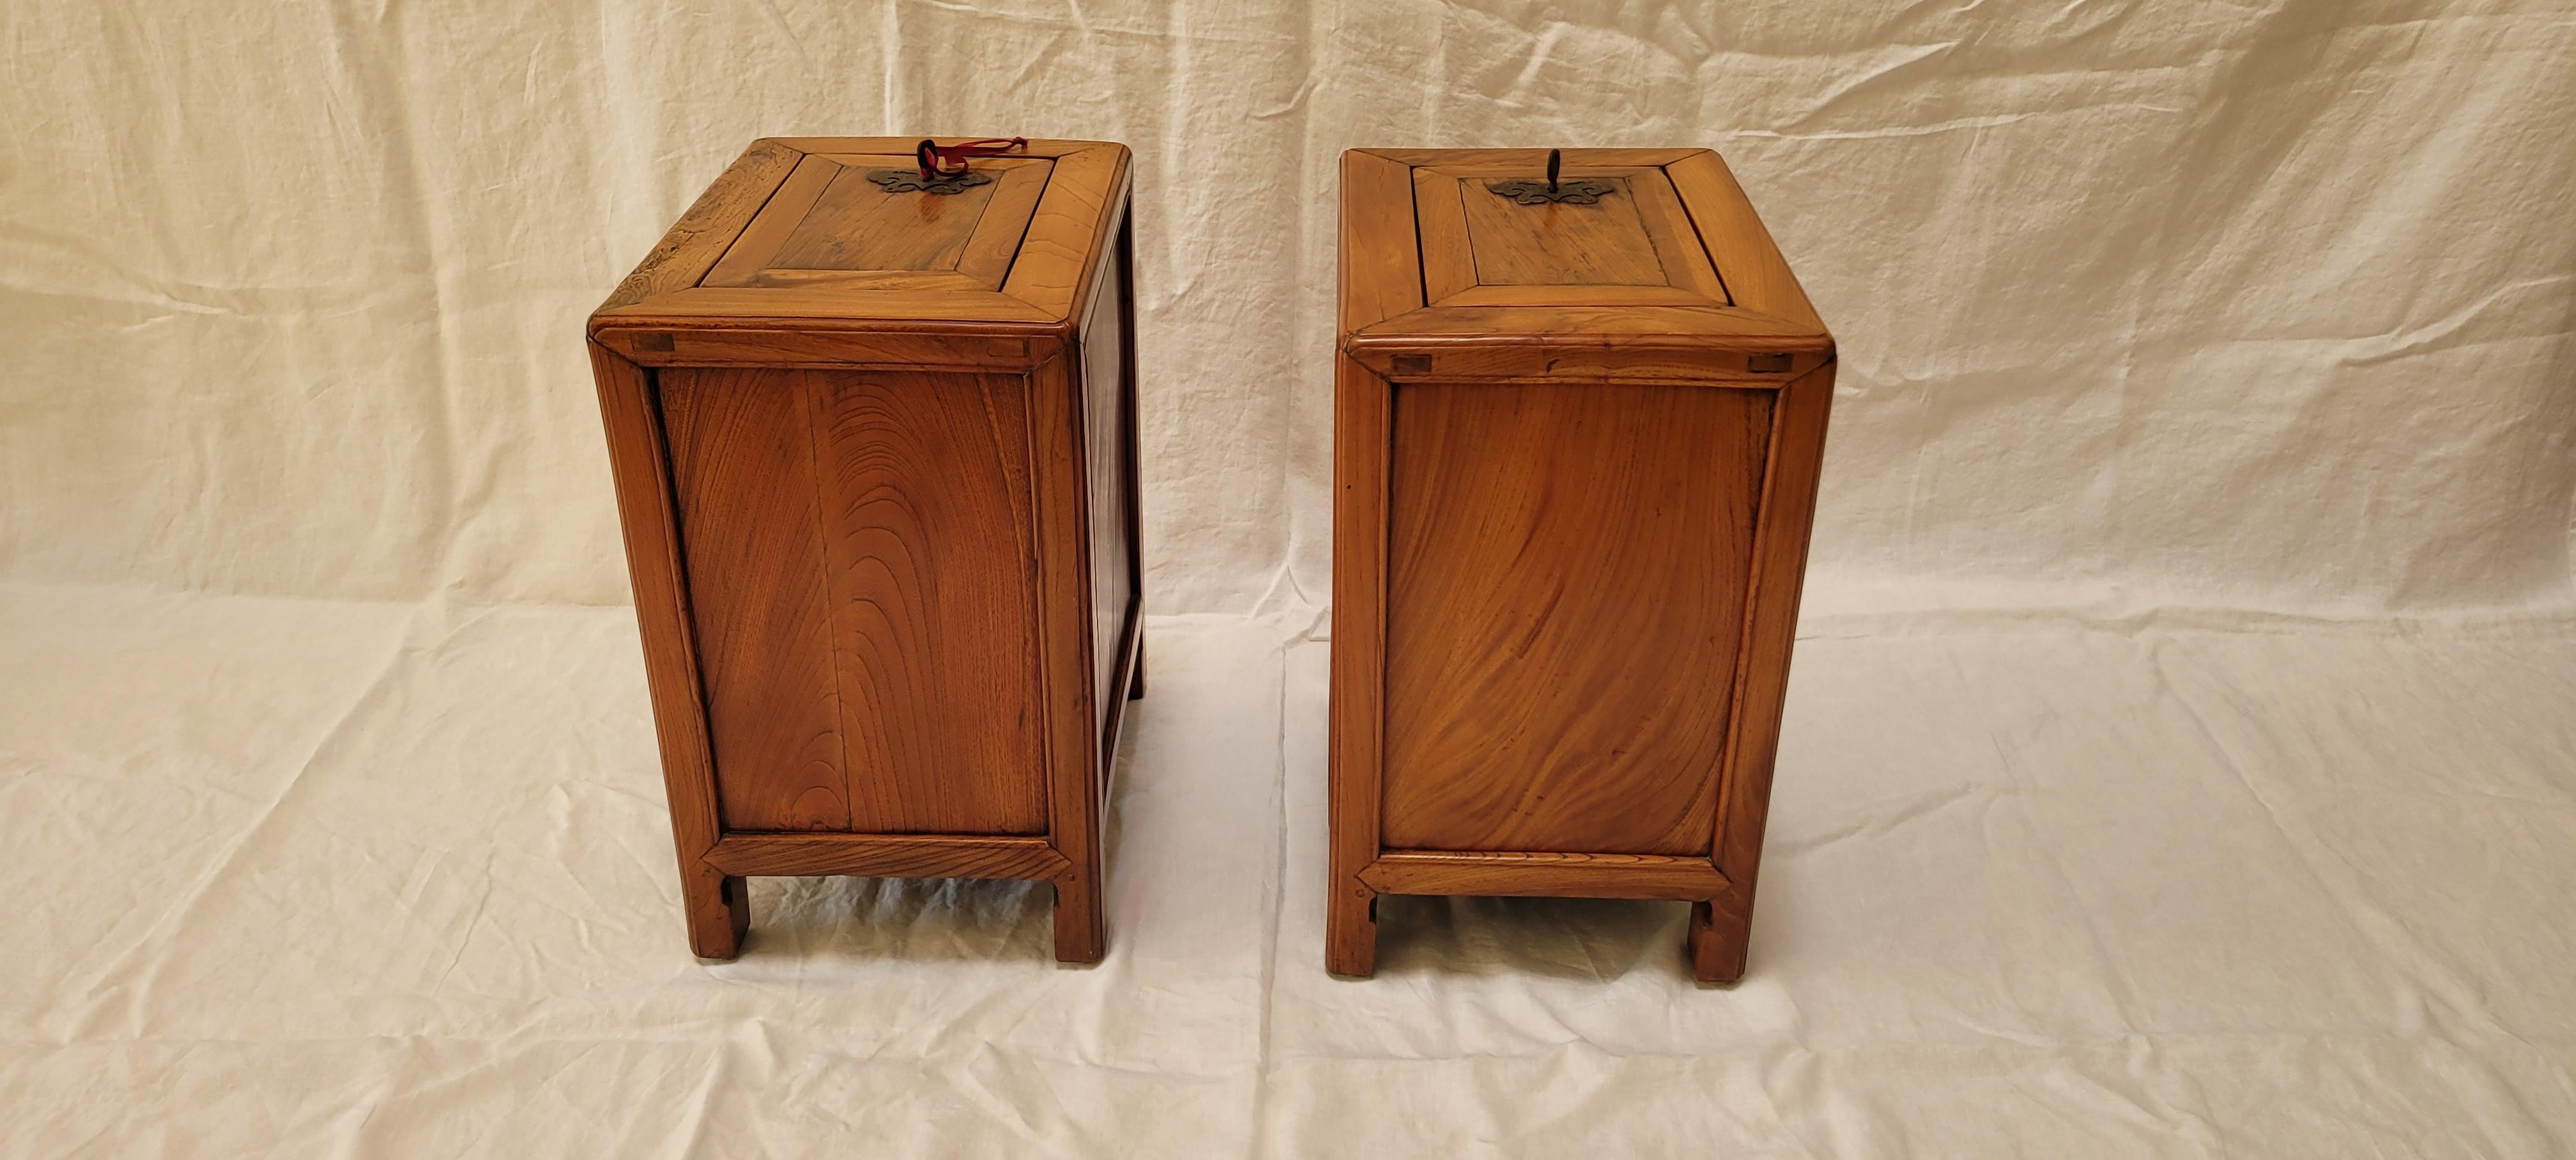 19th Century Pair of Money Chests For Sale 6